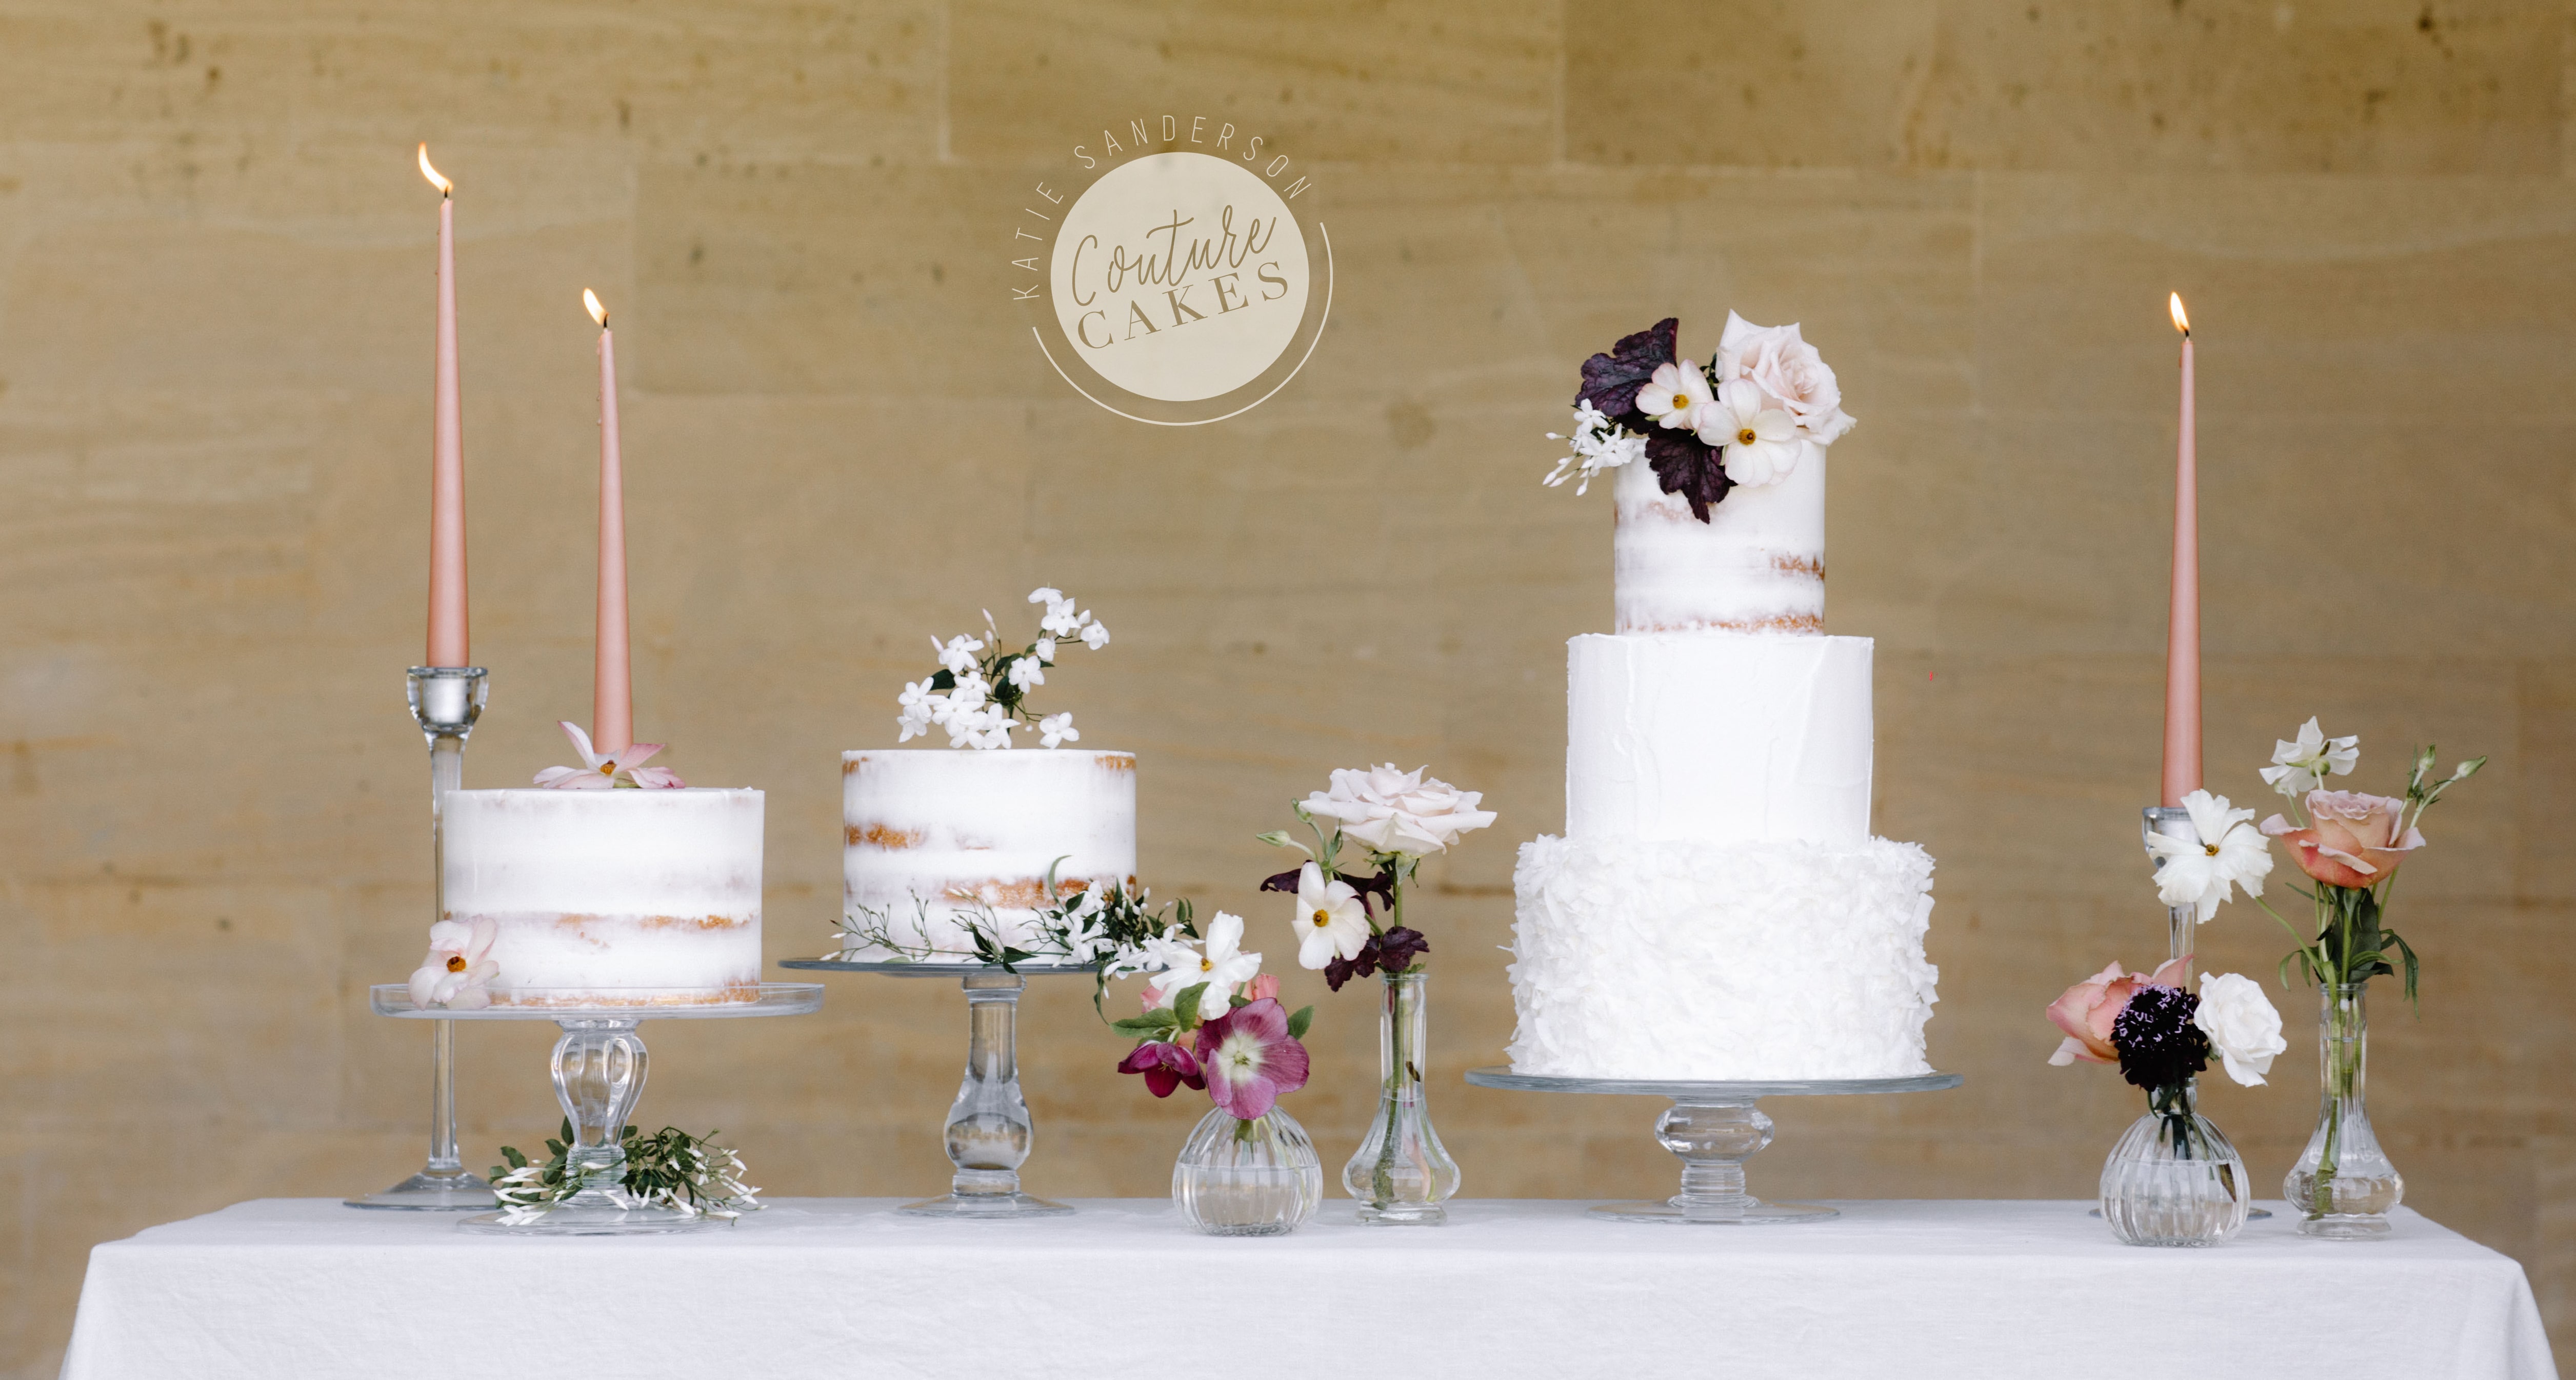 Main Cake serves 100 portions  £445, smaller cakes serve 40 portions each £85 each excl flowers